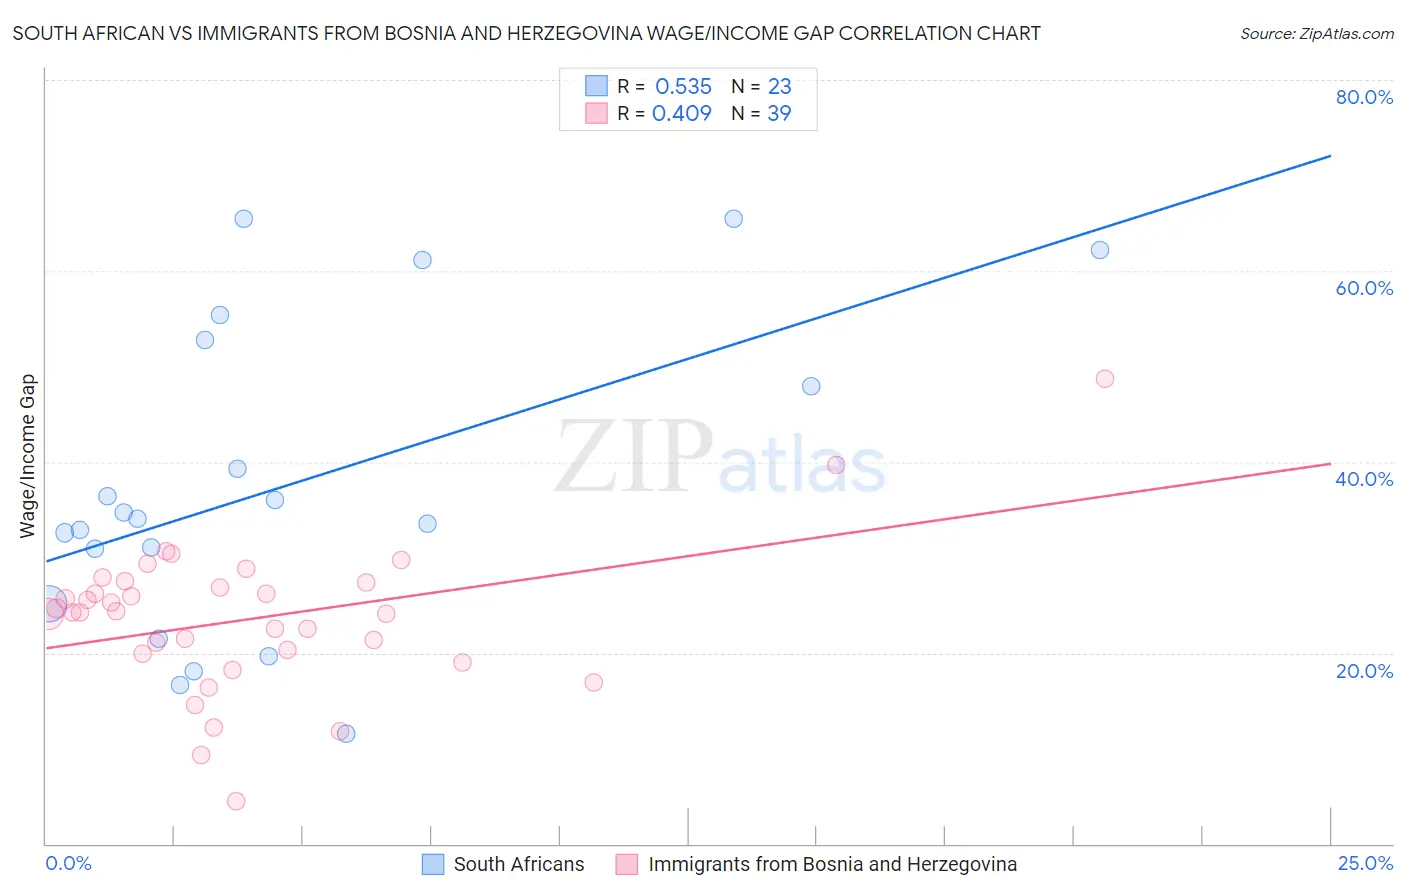 South African vs Immigrants from Bosnia and Herzegovina Wage/Income Gap